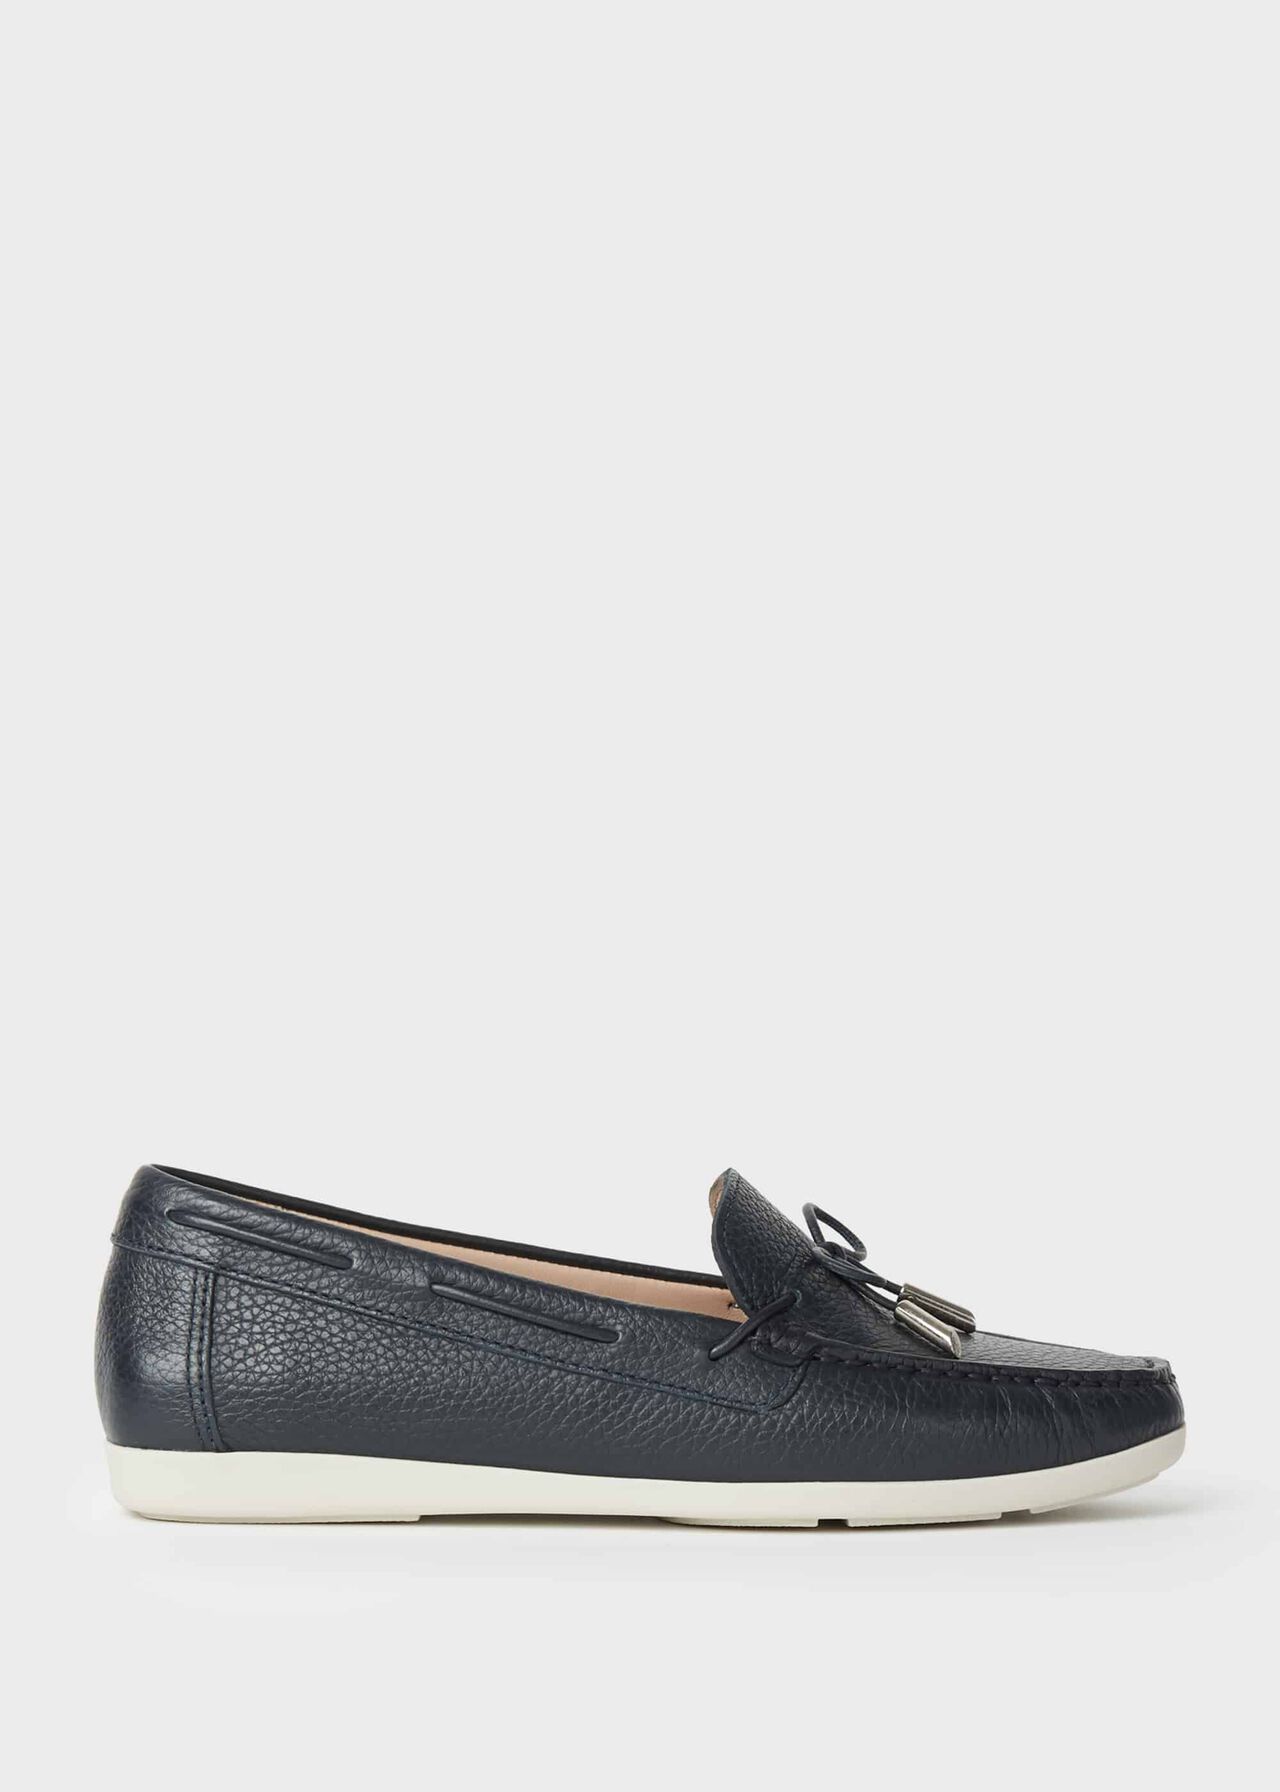 Emily Leather Moccasins, Navy, hi-res